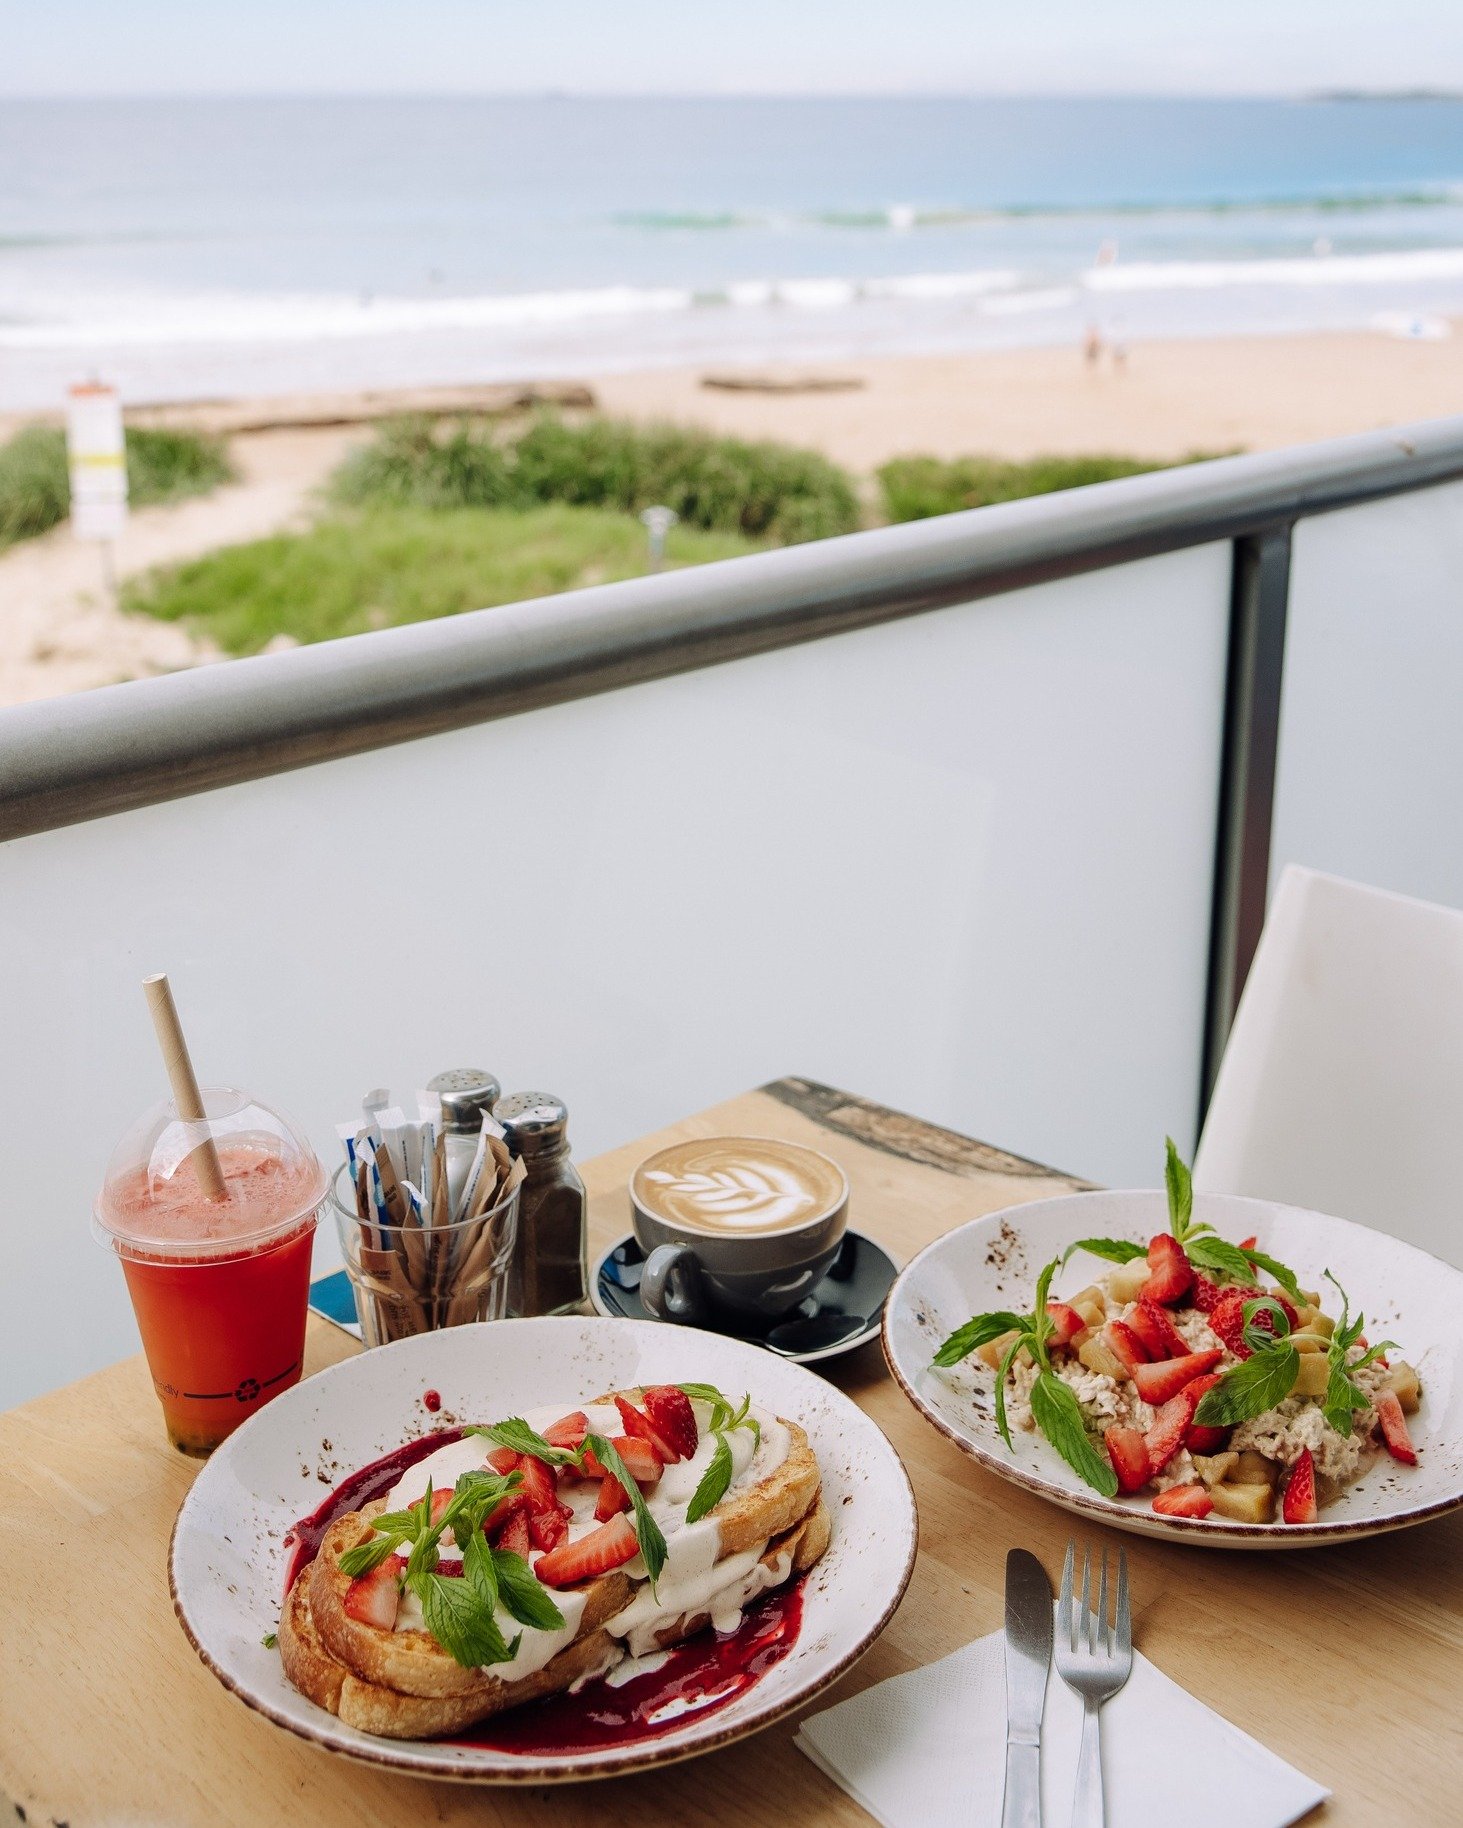 Breakfast by the beach? Yes, please! 

Book your table online today www.bullibeachcafe.com.au